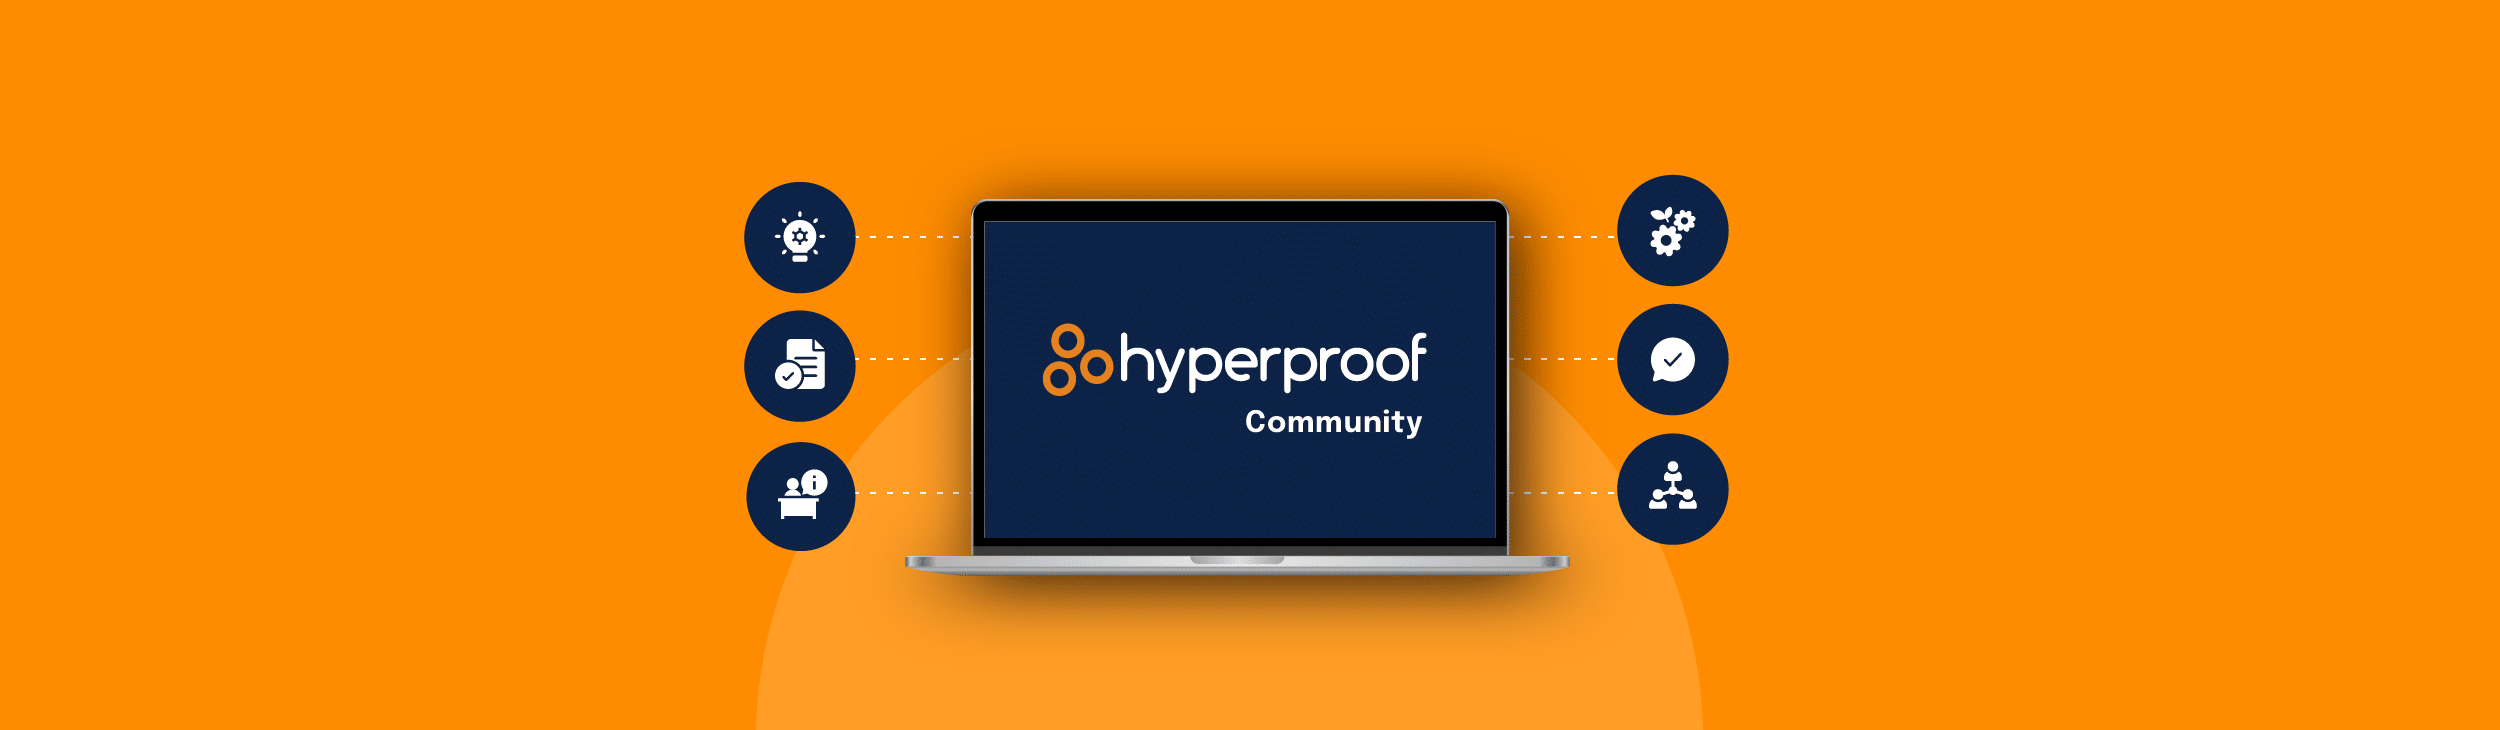 Blog thumbnail vector image for the blog post, "Did you know about the Hyperproof Community?"